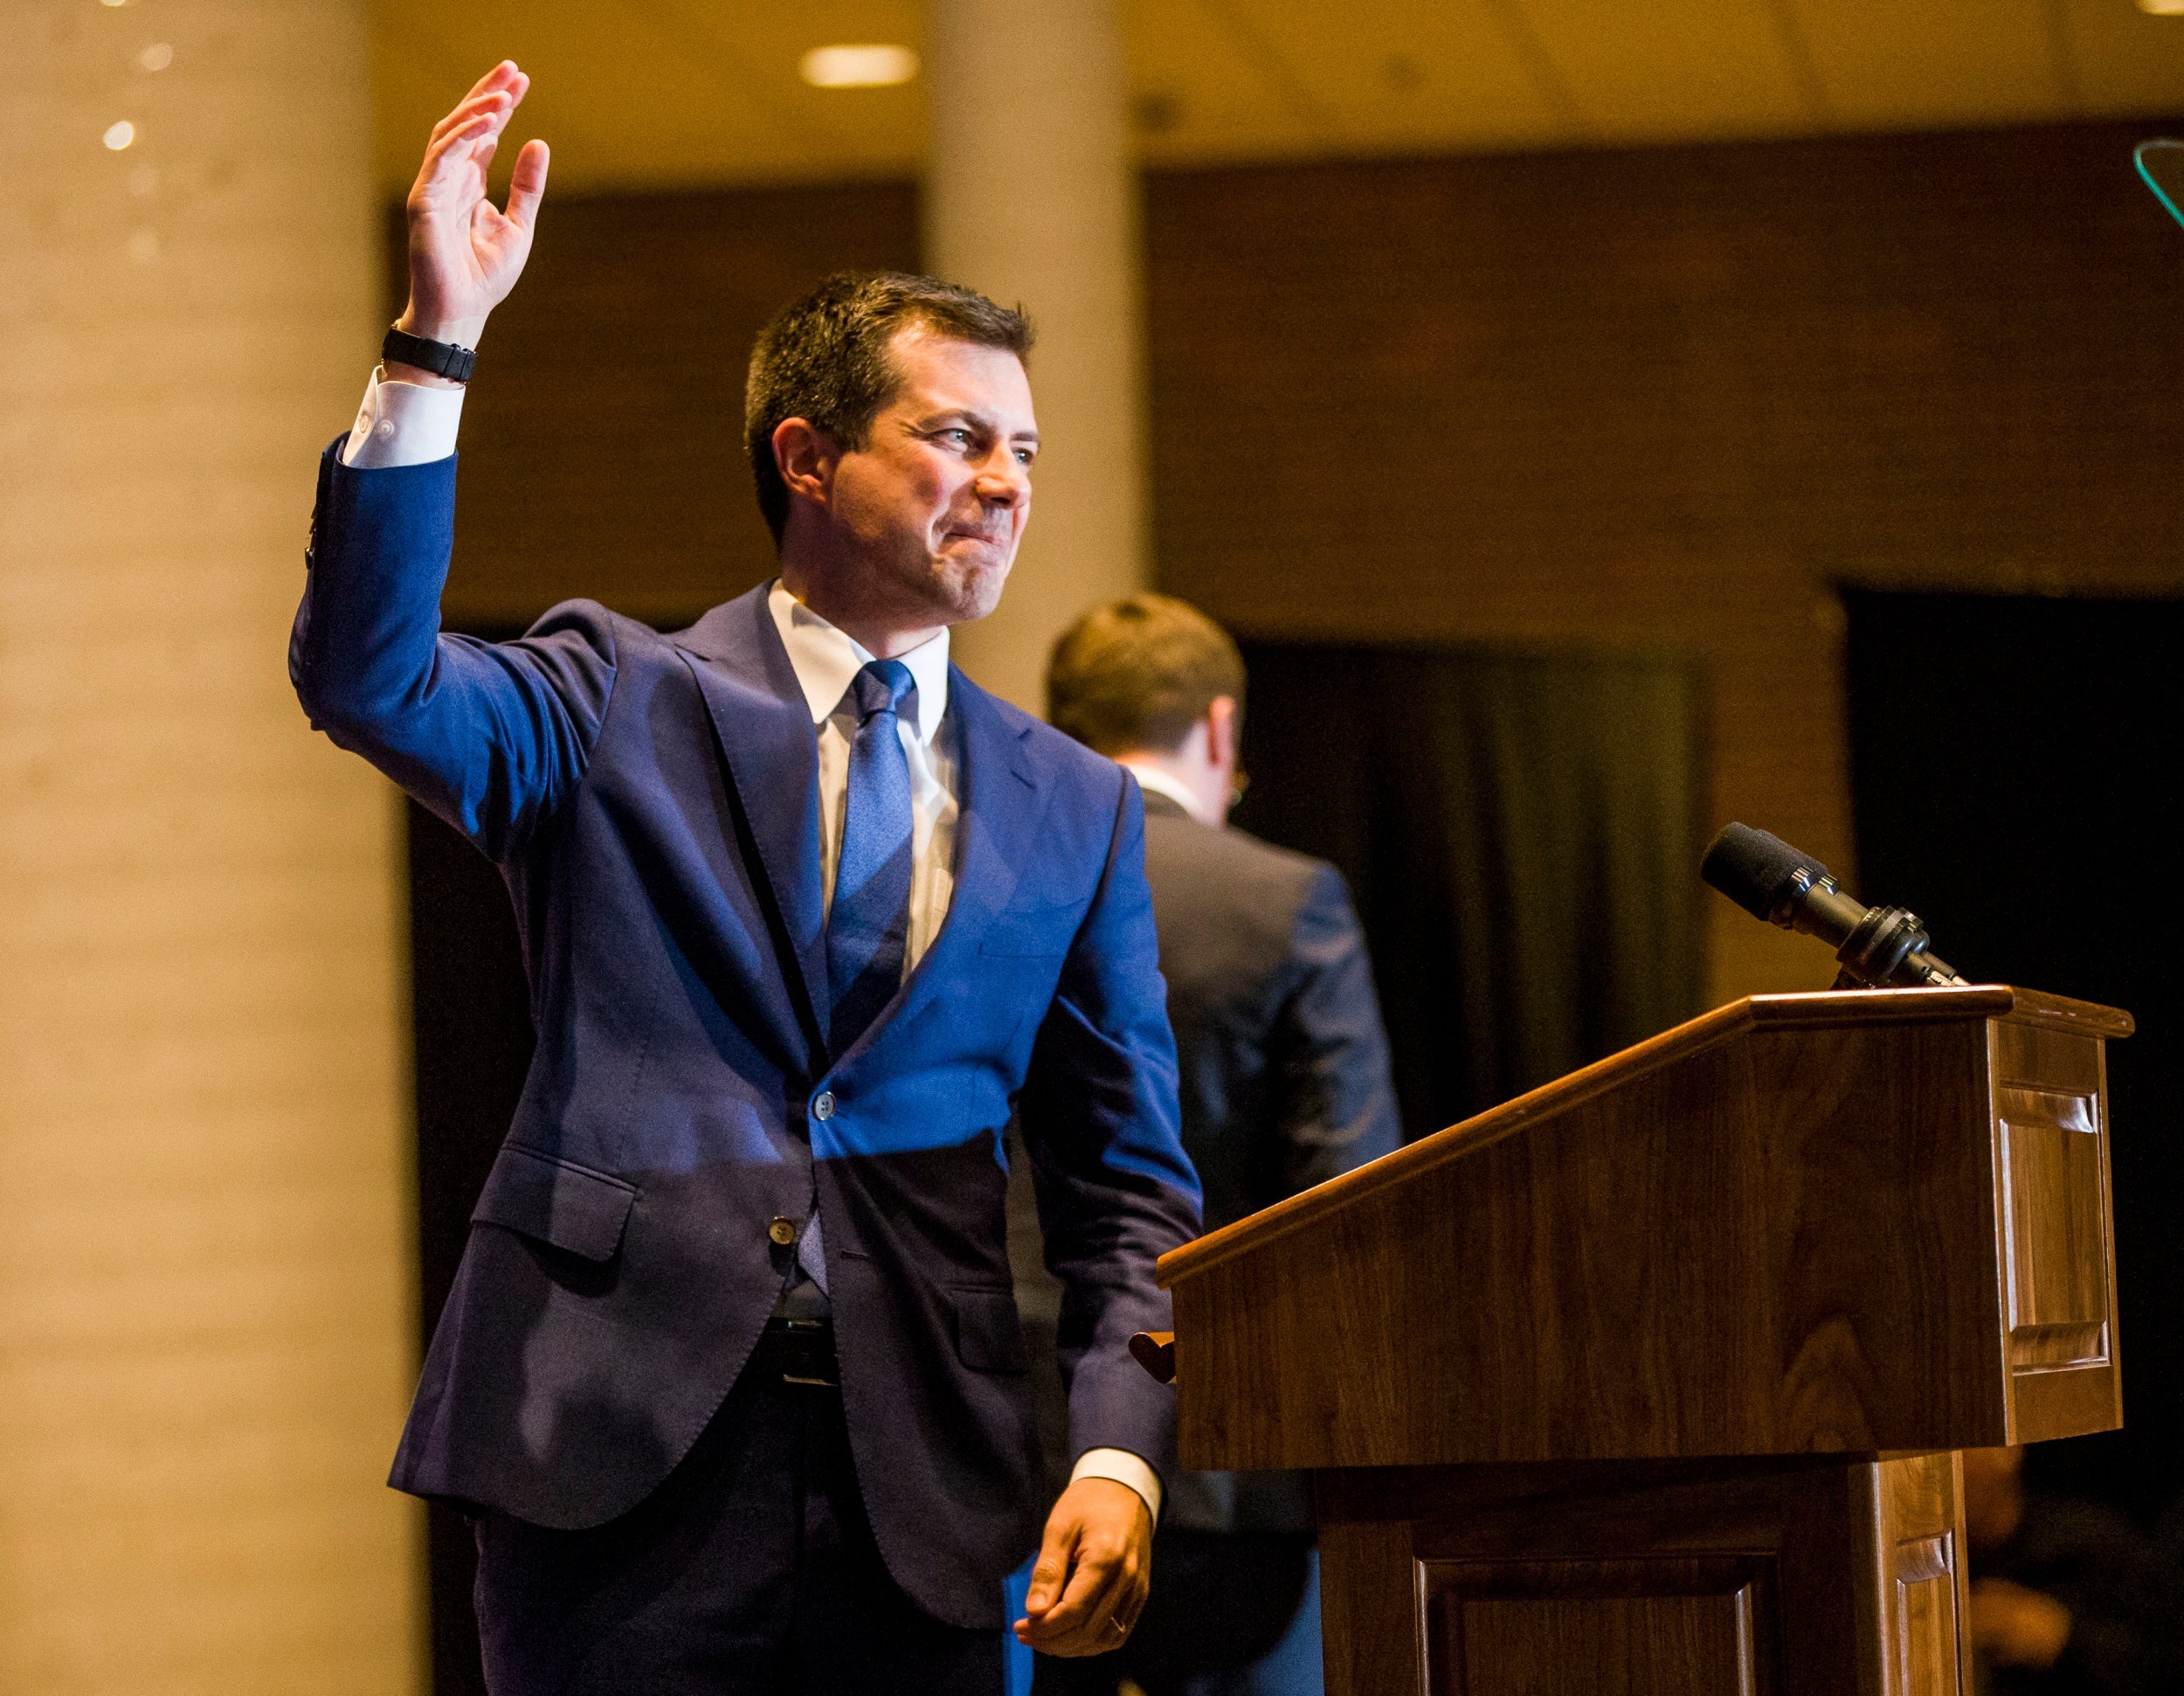 Pete Buttigieg returned to South Bend, Indiana to announce his withdrawal from the 2020 race.